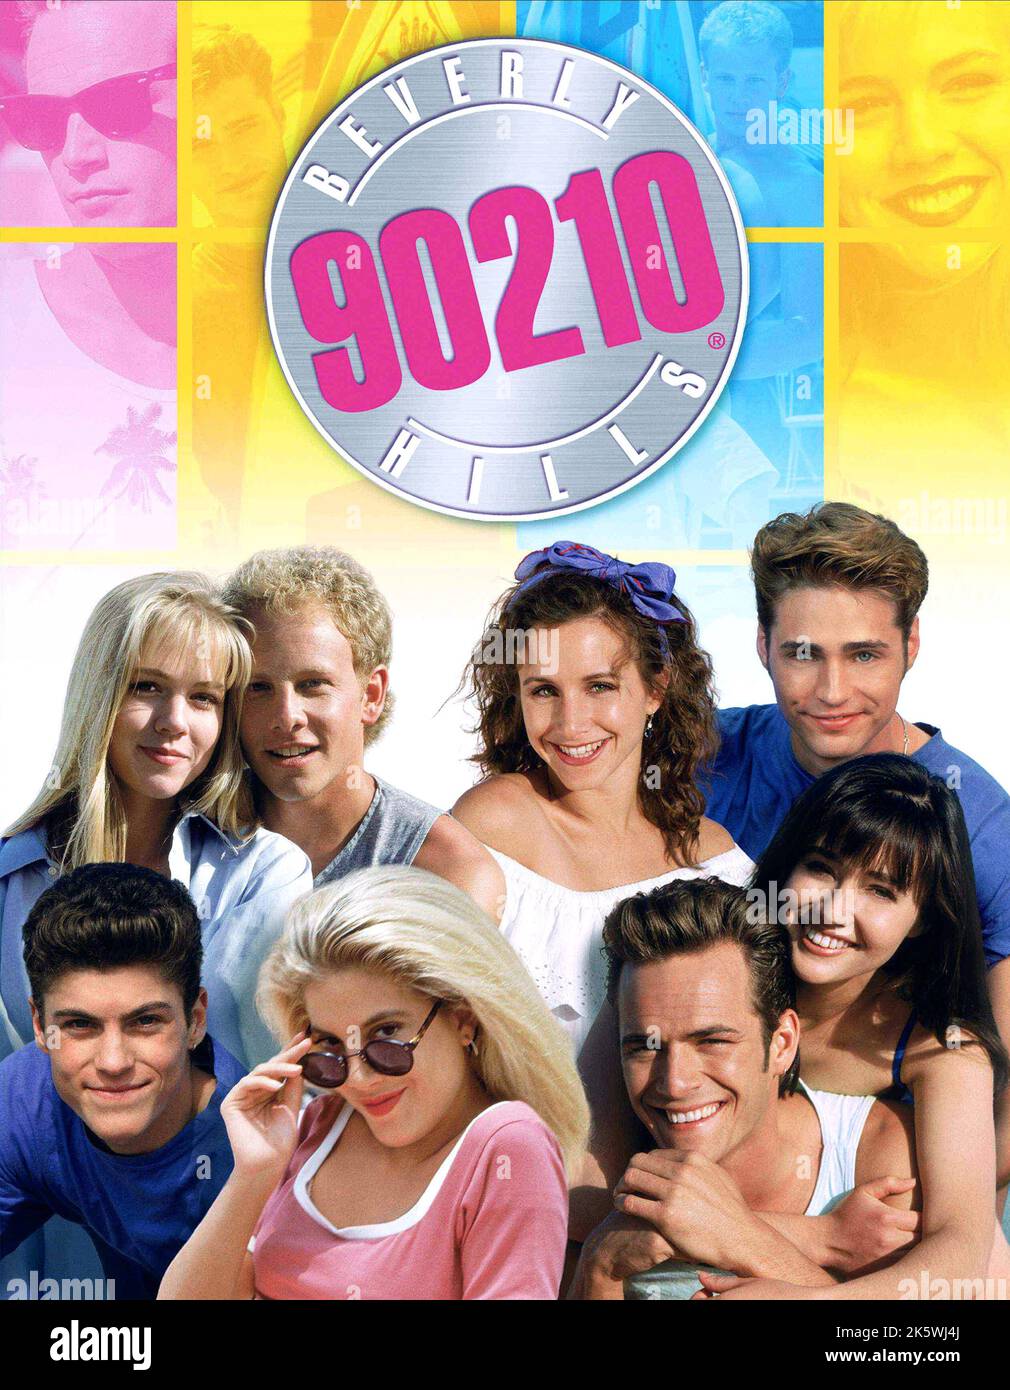 Beverly Hills 90210 TV Show Poster Stock Photo